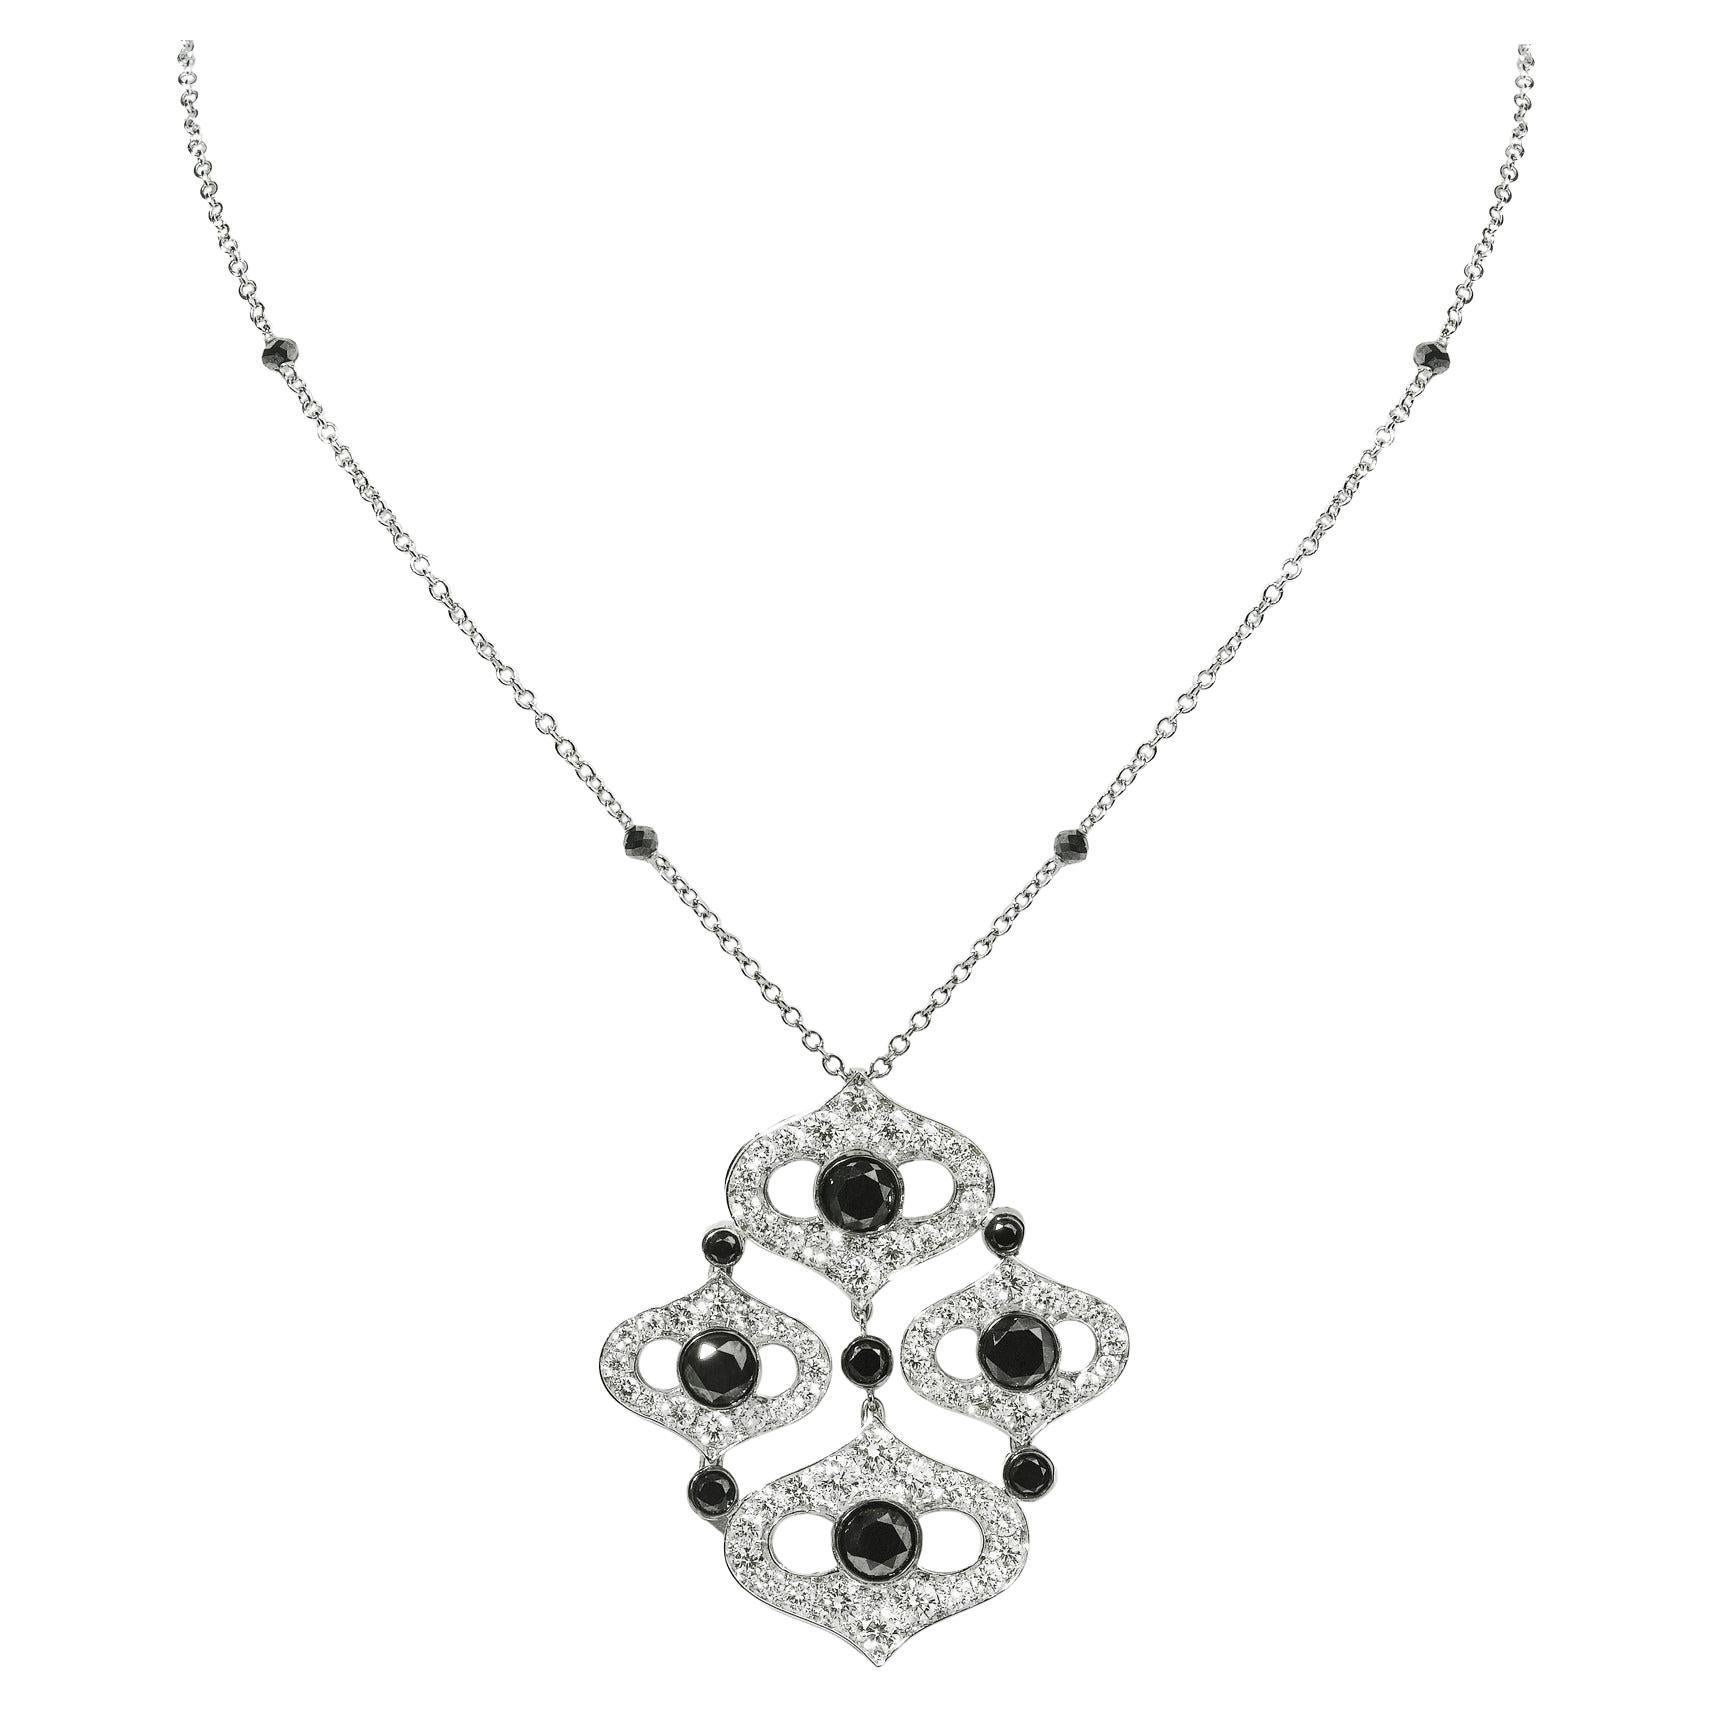 White and Black Diamonds Pav�è Cut Out Necklace in 18kt White Gold For Sale